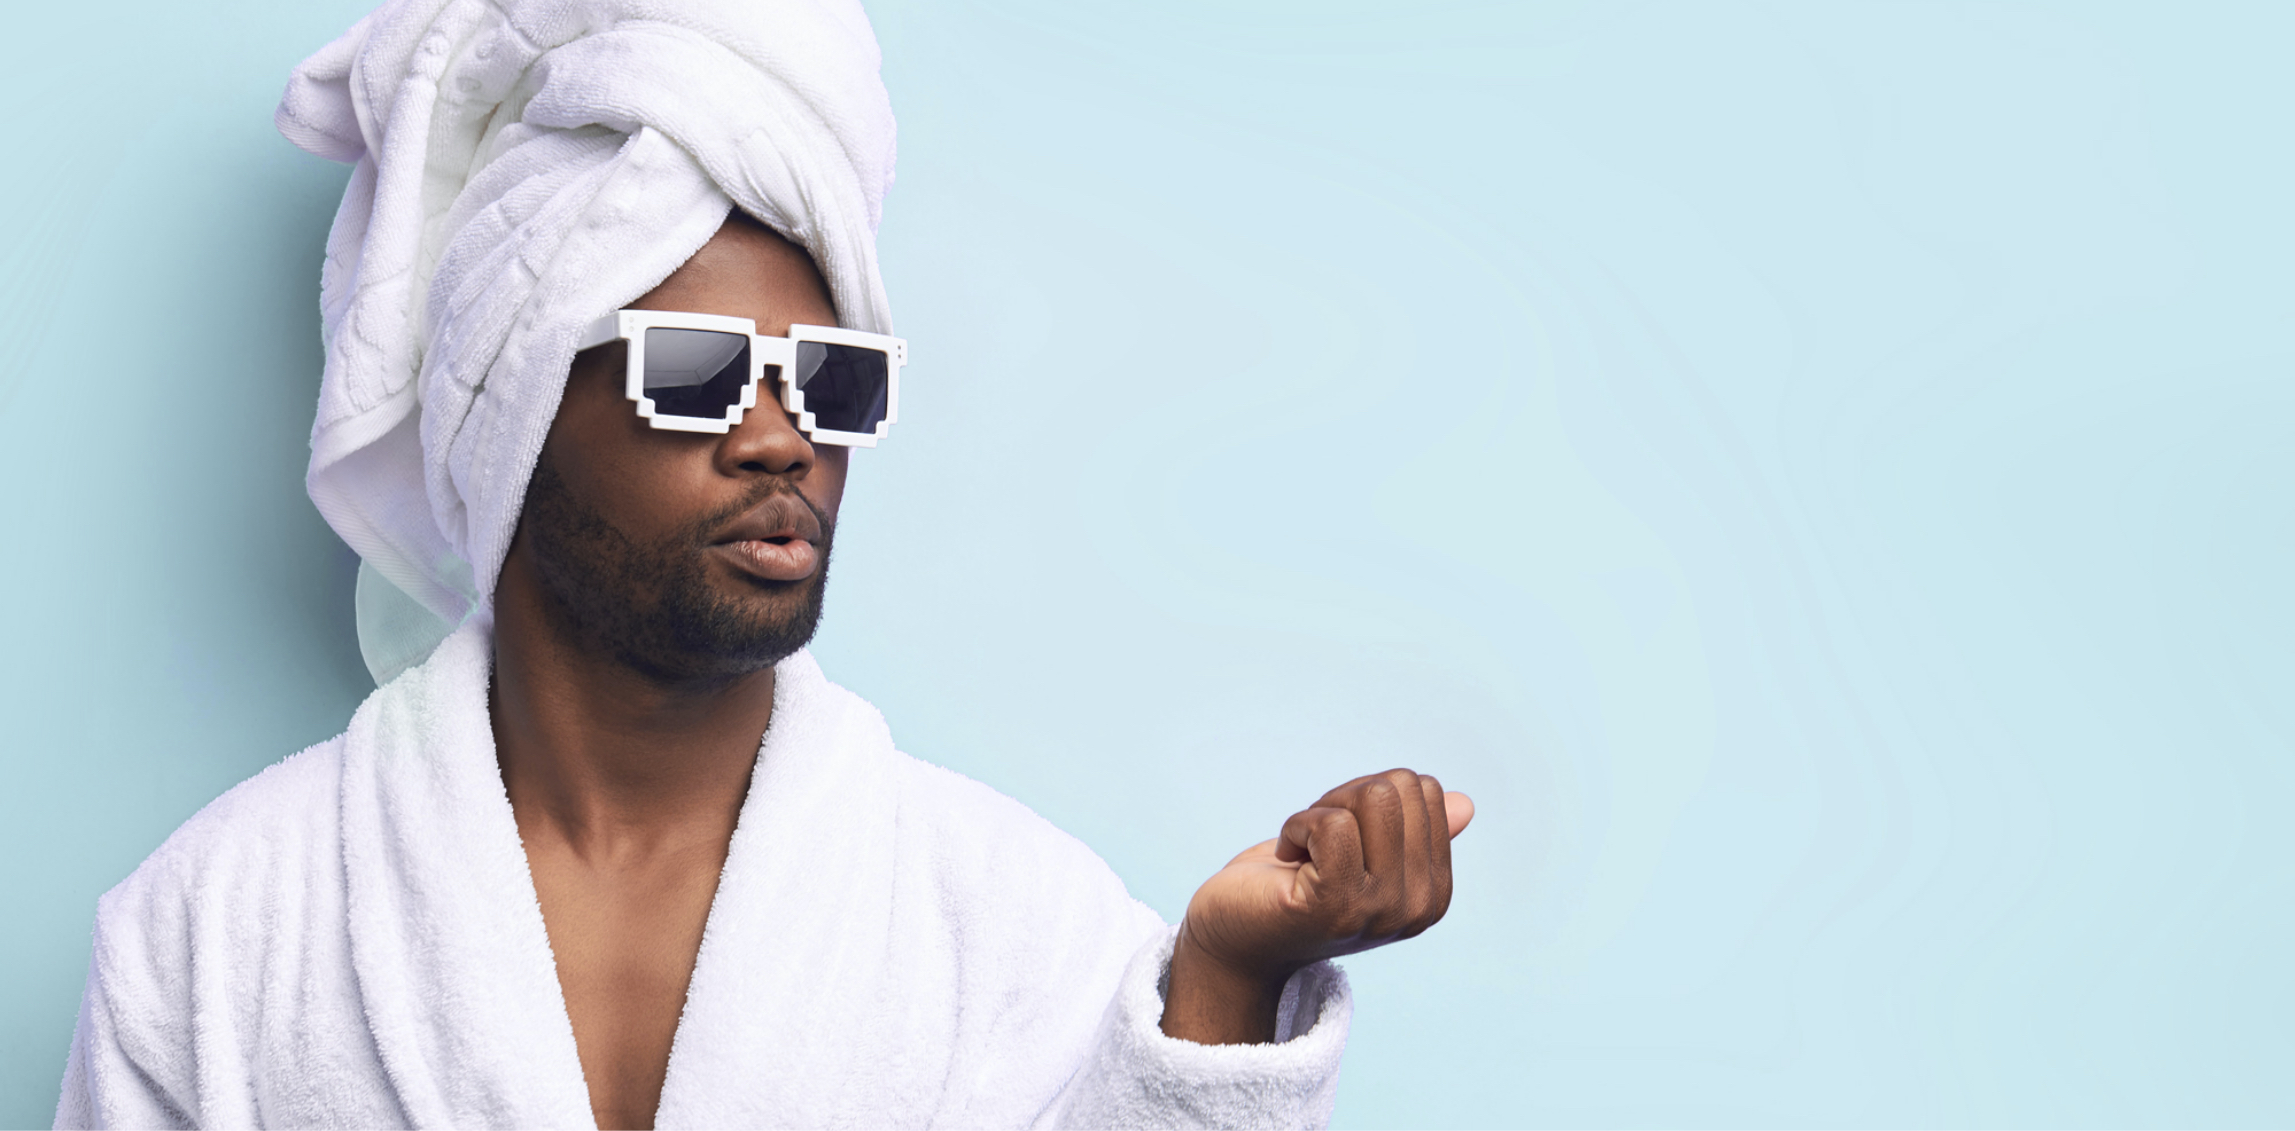 Man wearing sunglasses and a spa robe